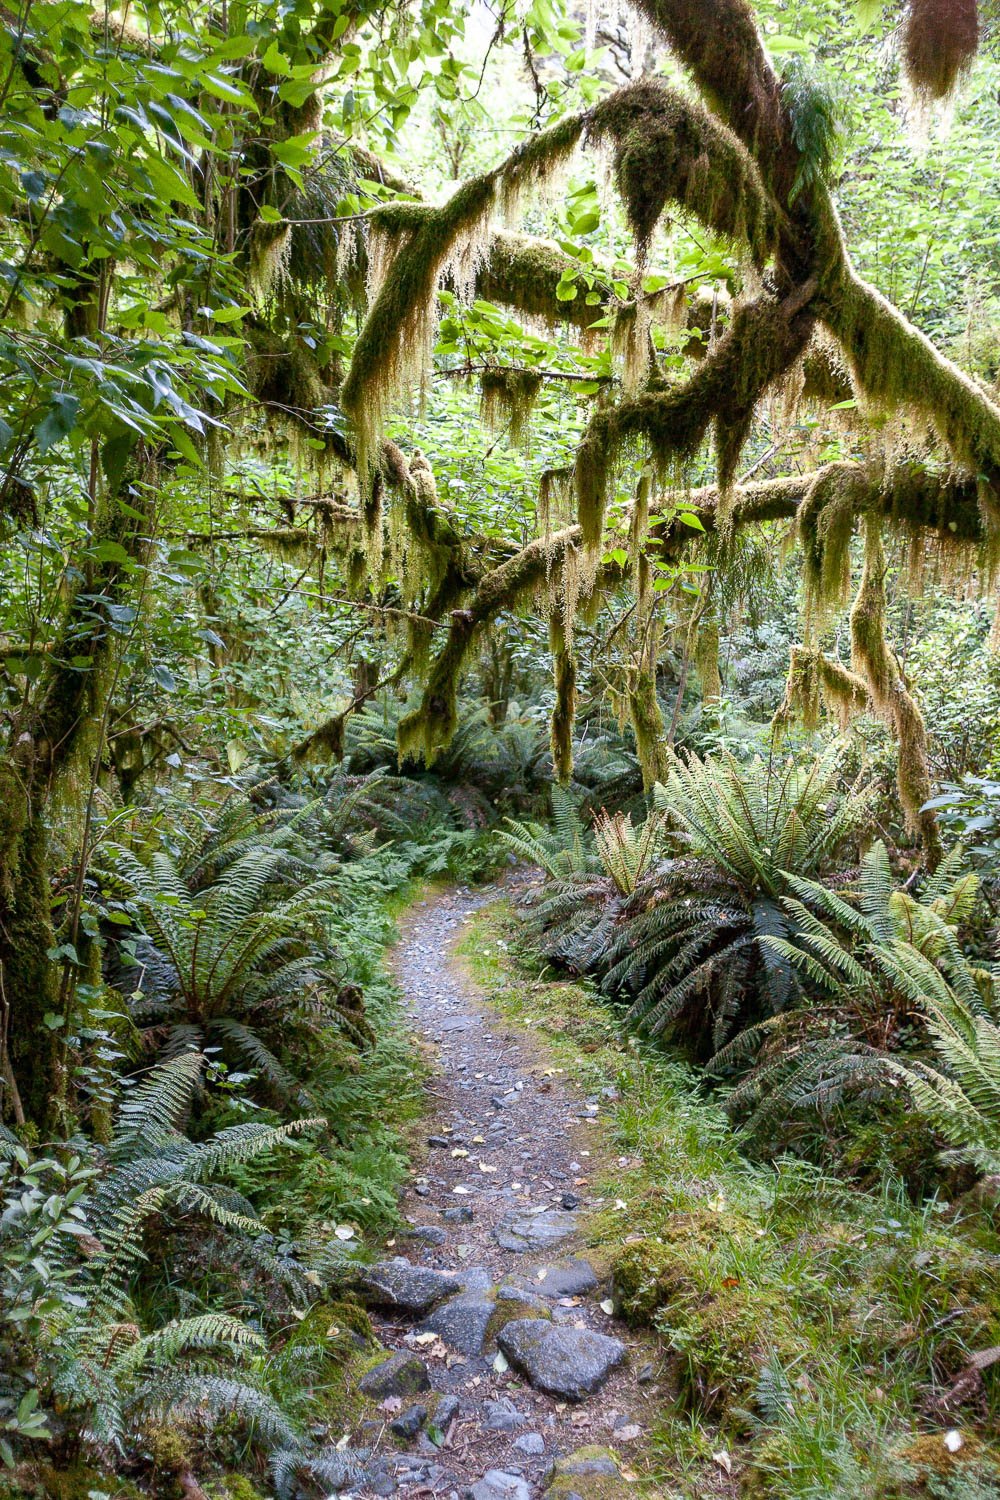 Narrow pathway between bushes and plants, Milford Track rainforest - New Zealand